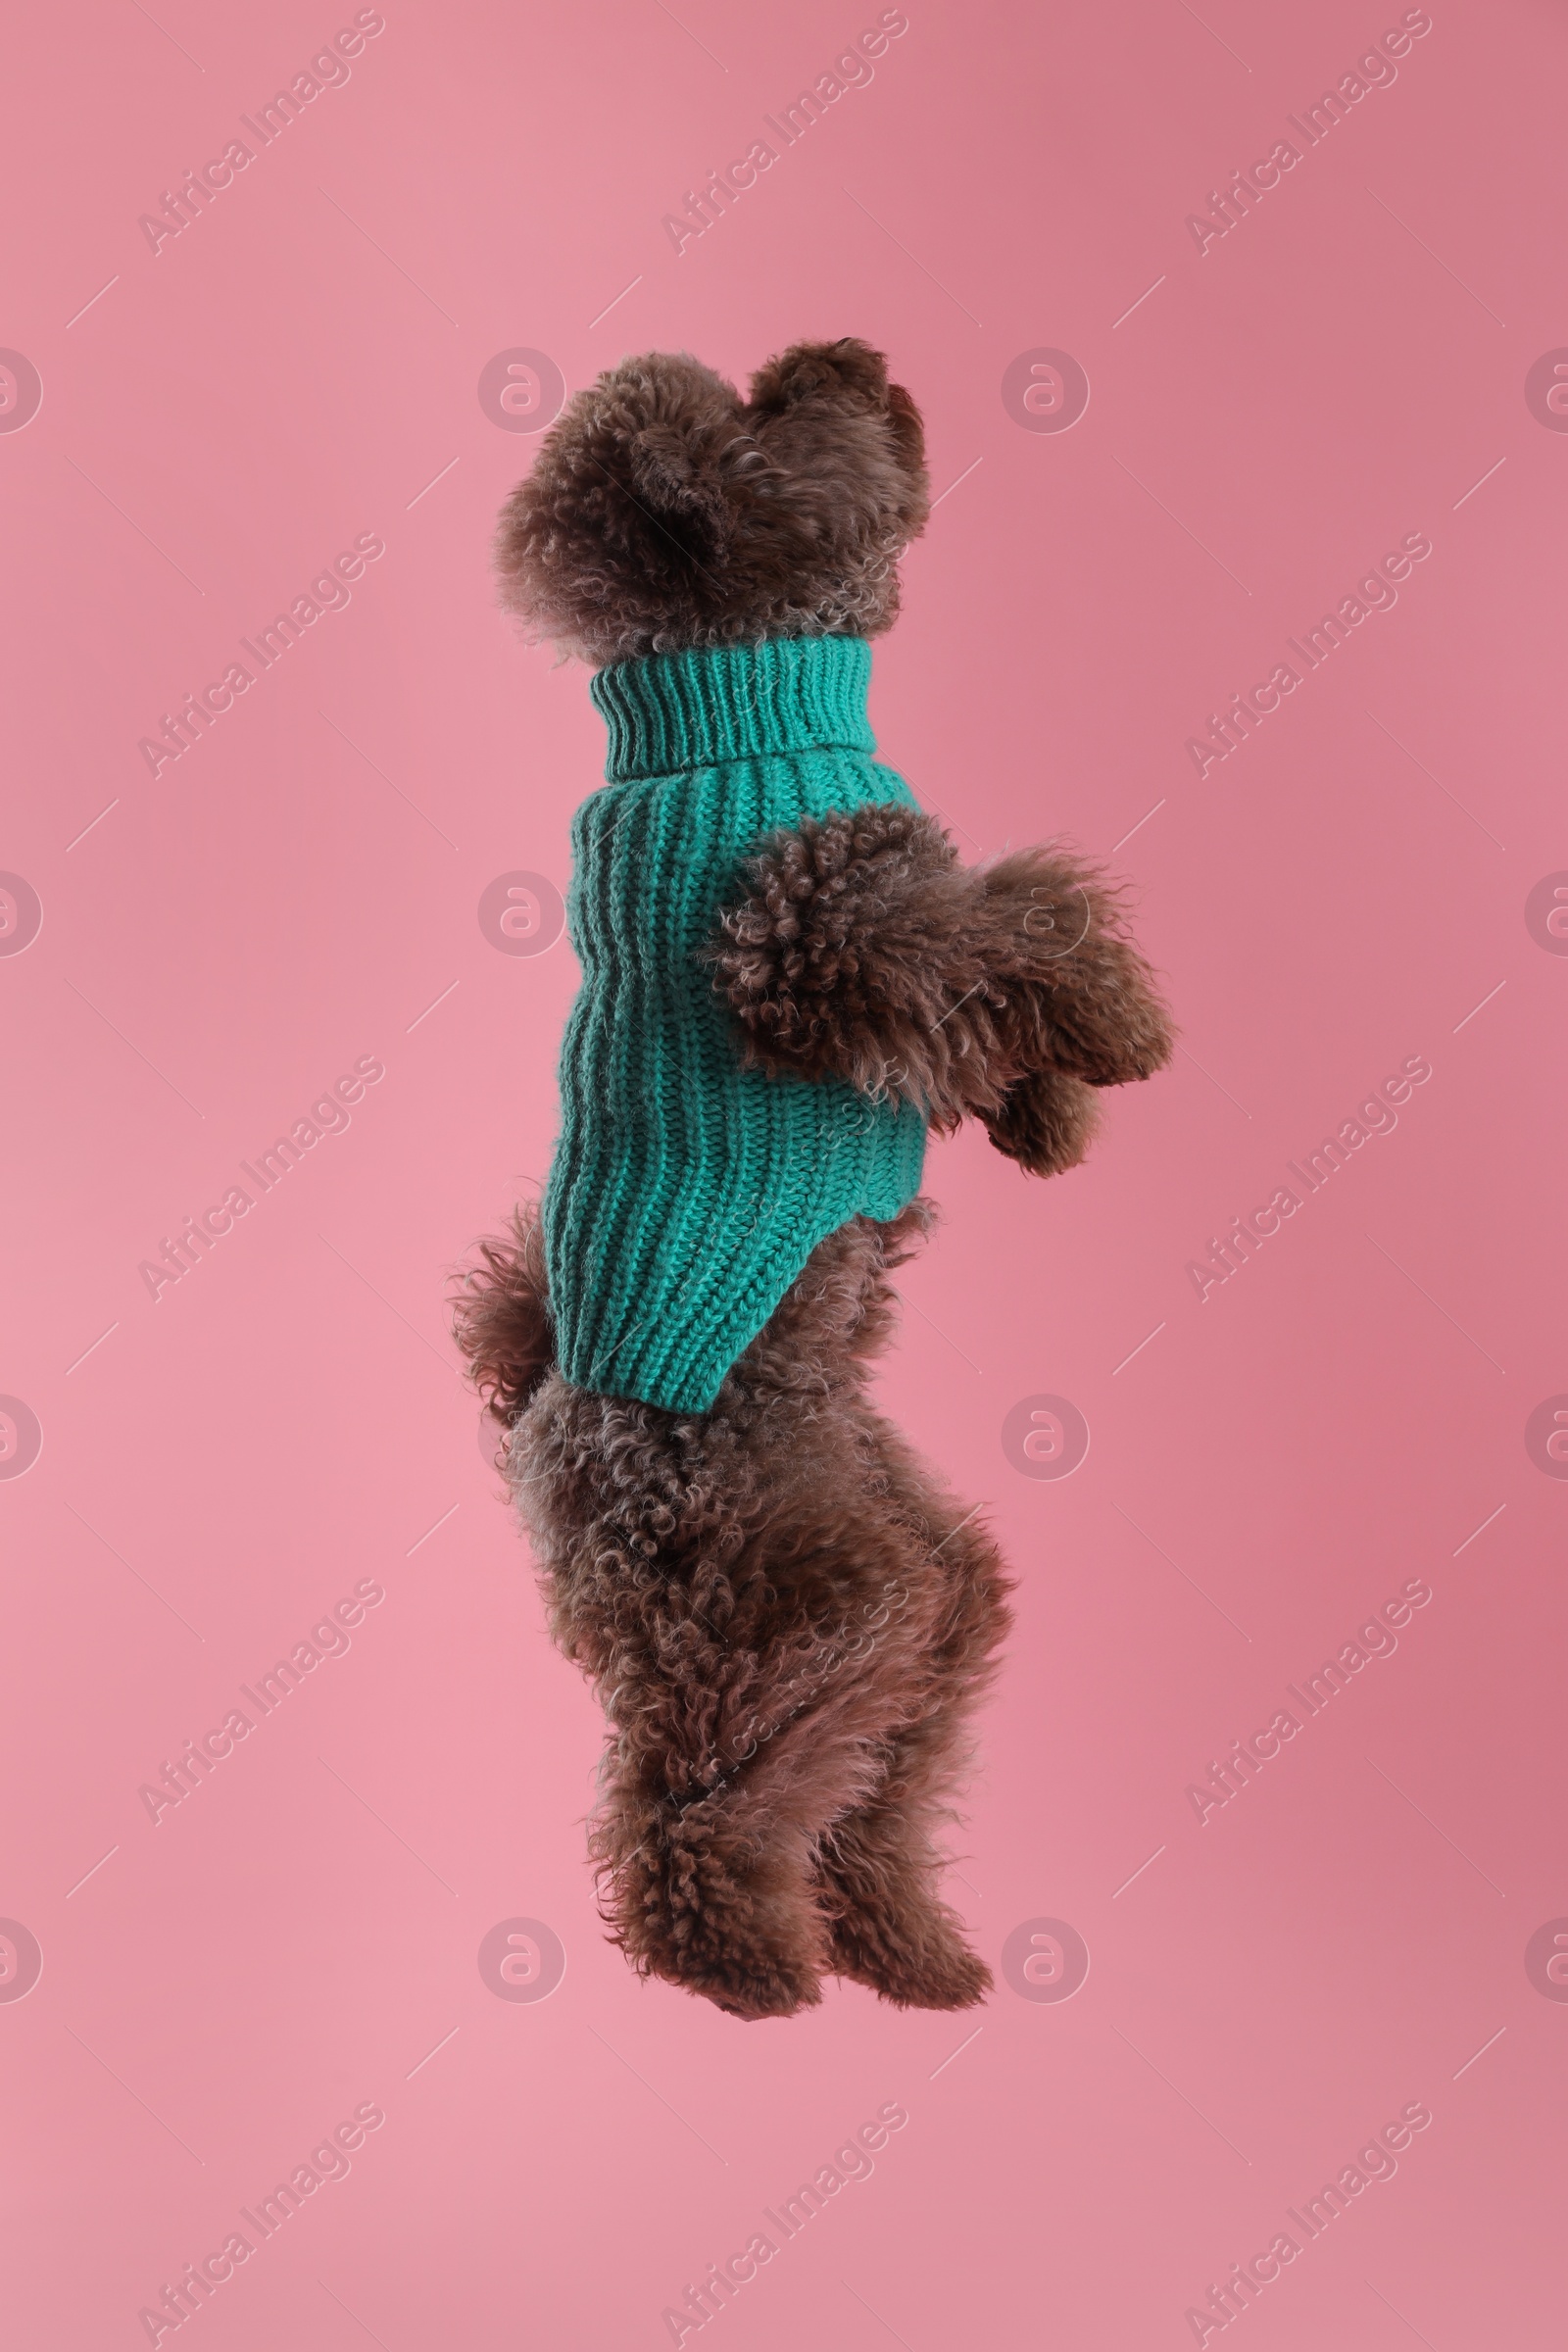 Photo of Cute Toy Poodle dog in knitted sweater jumping on pink background